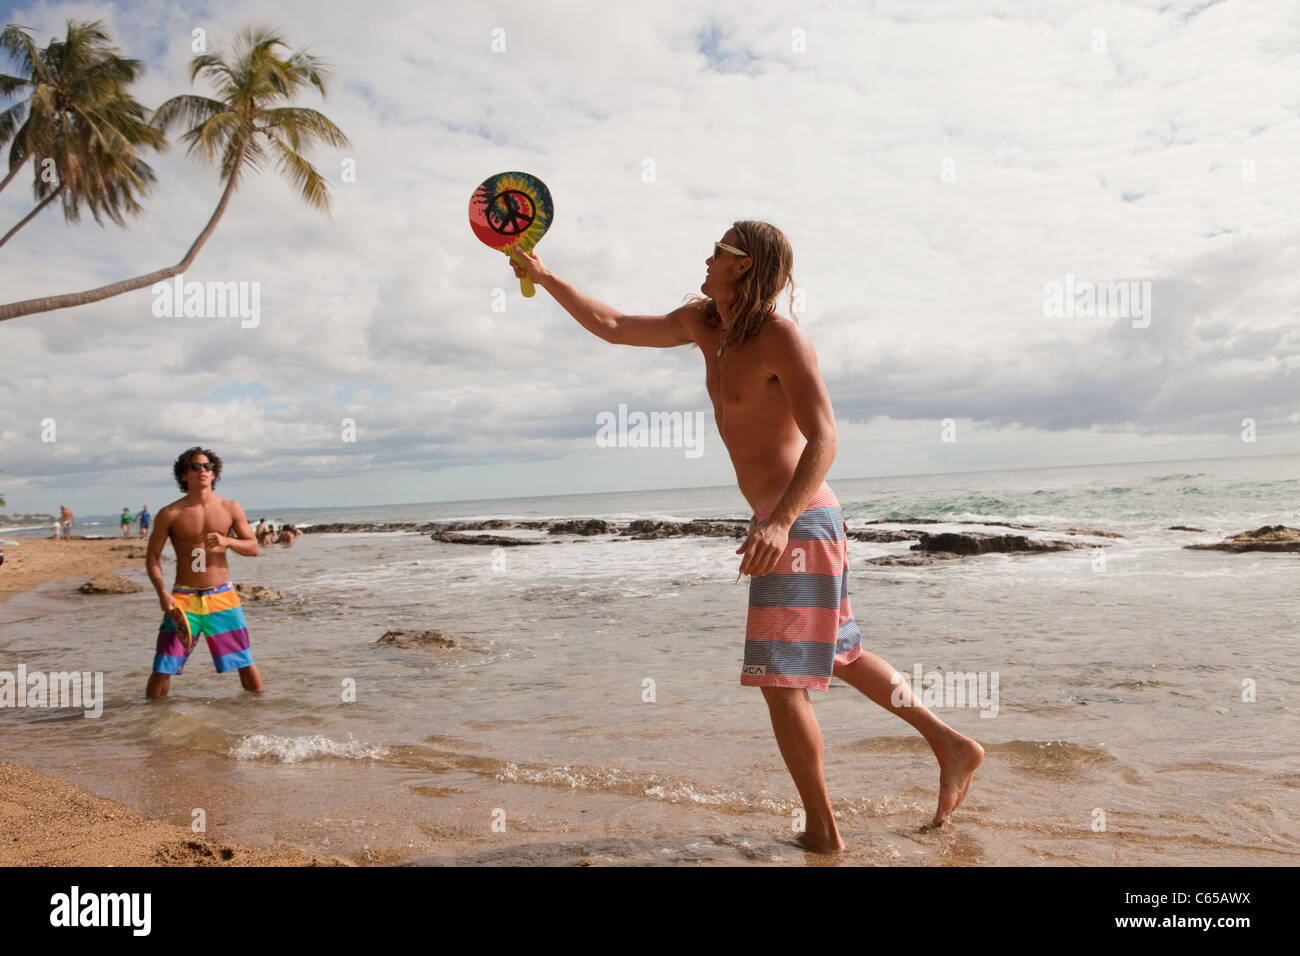 People on beach, men playing bat and ball game Stock Photo